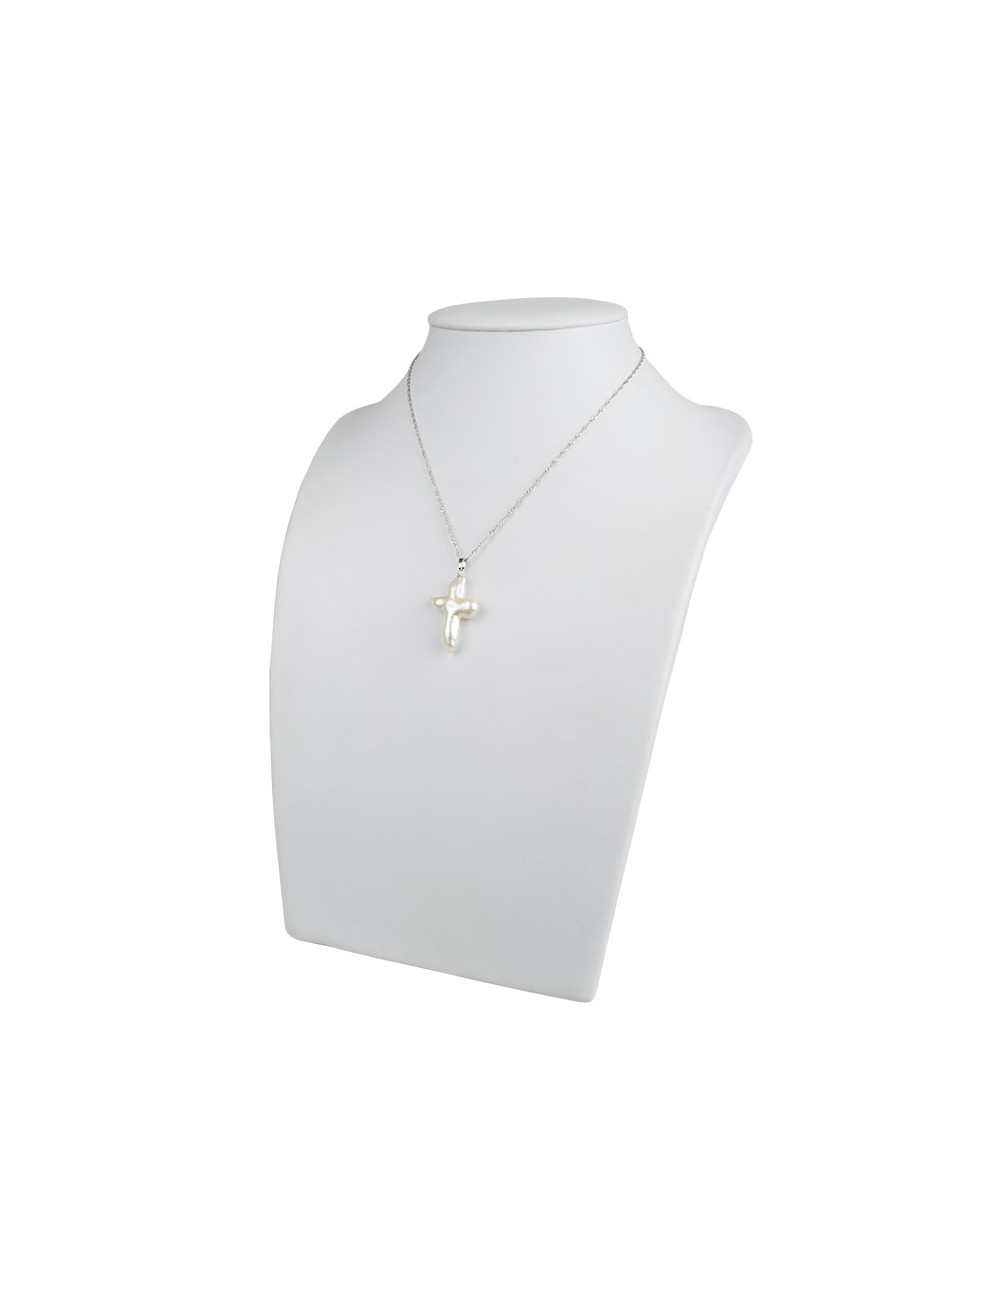 Singapore weave chain with cross-shaped white freshwater pearl pendant LANB201S